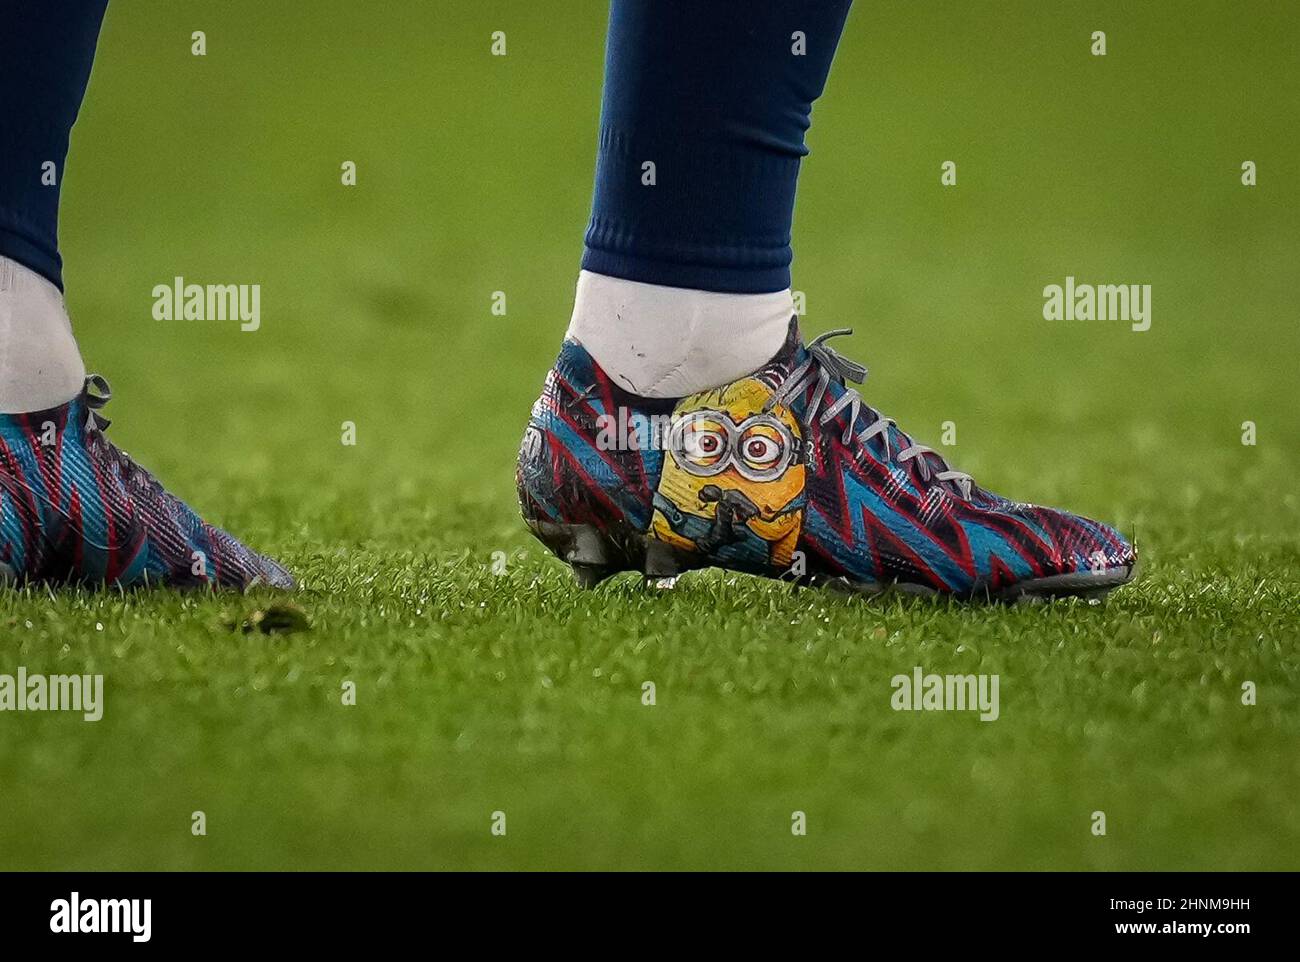 Wolverhampton, UK. 10th Feb, 2022. The personalised nike football boot of  Alexandre Lacazette of Arsenal displaying a minion image during the Premier  League match between Wolverhampton Wanderers and Arsenal at Molineux,  Wolverhampton,